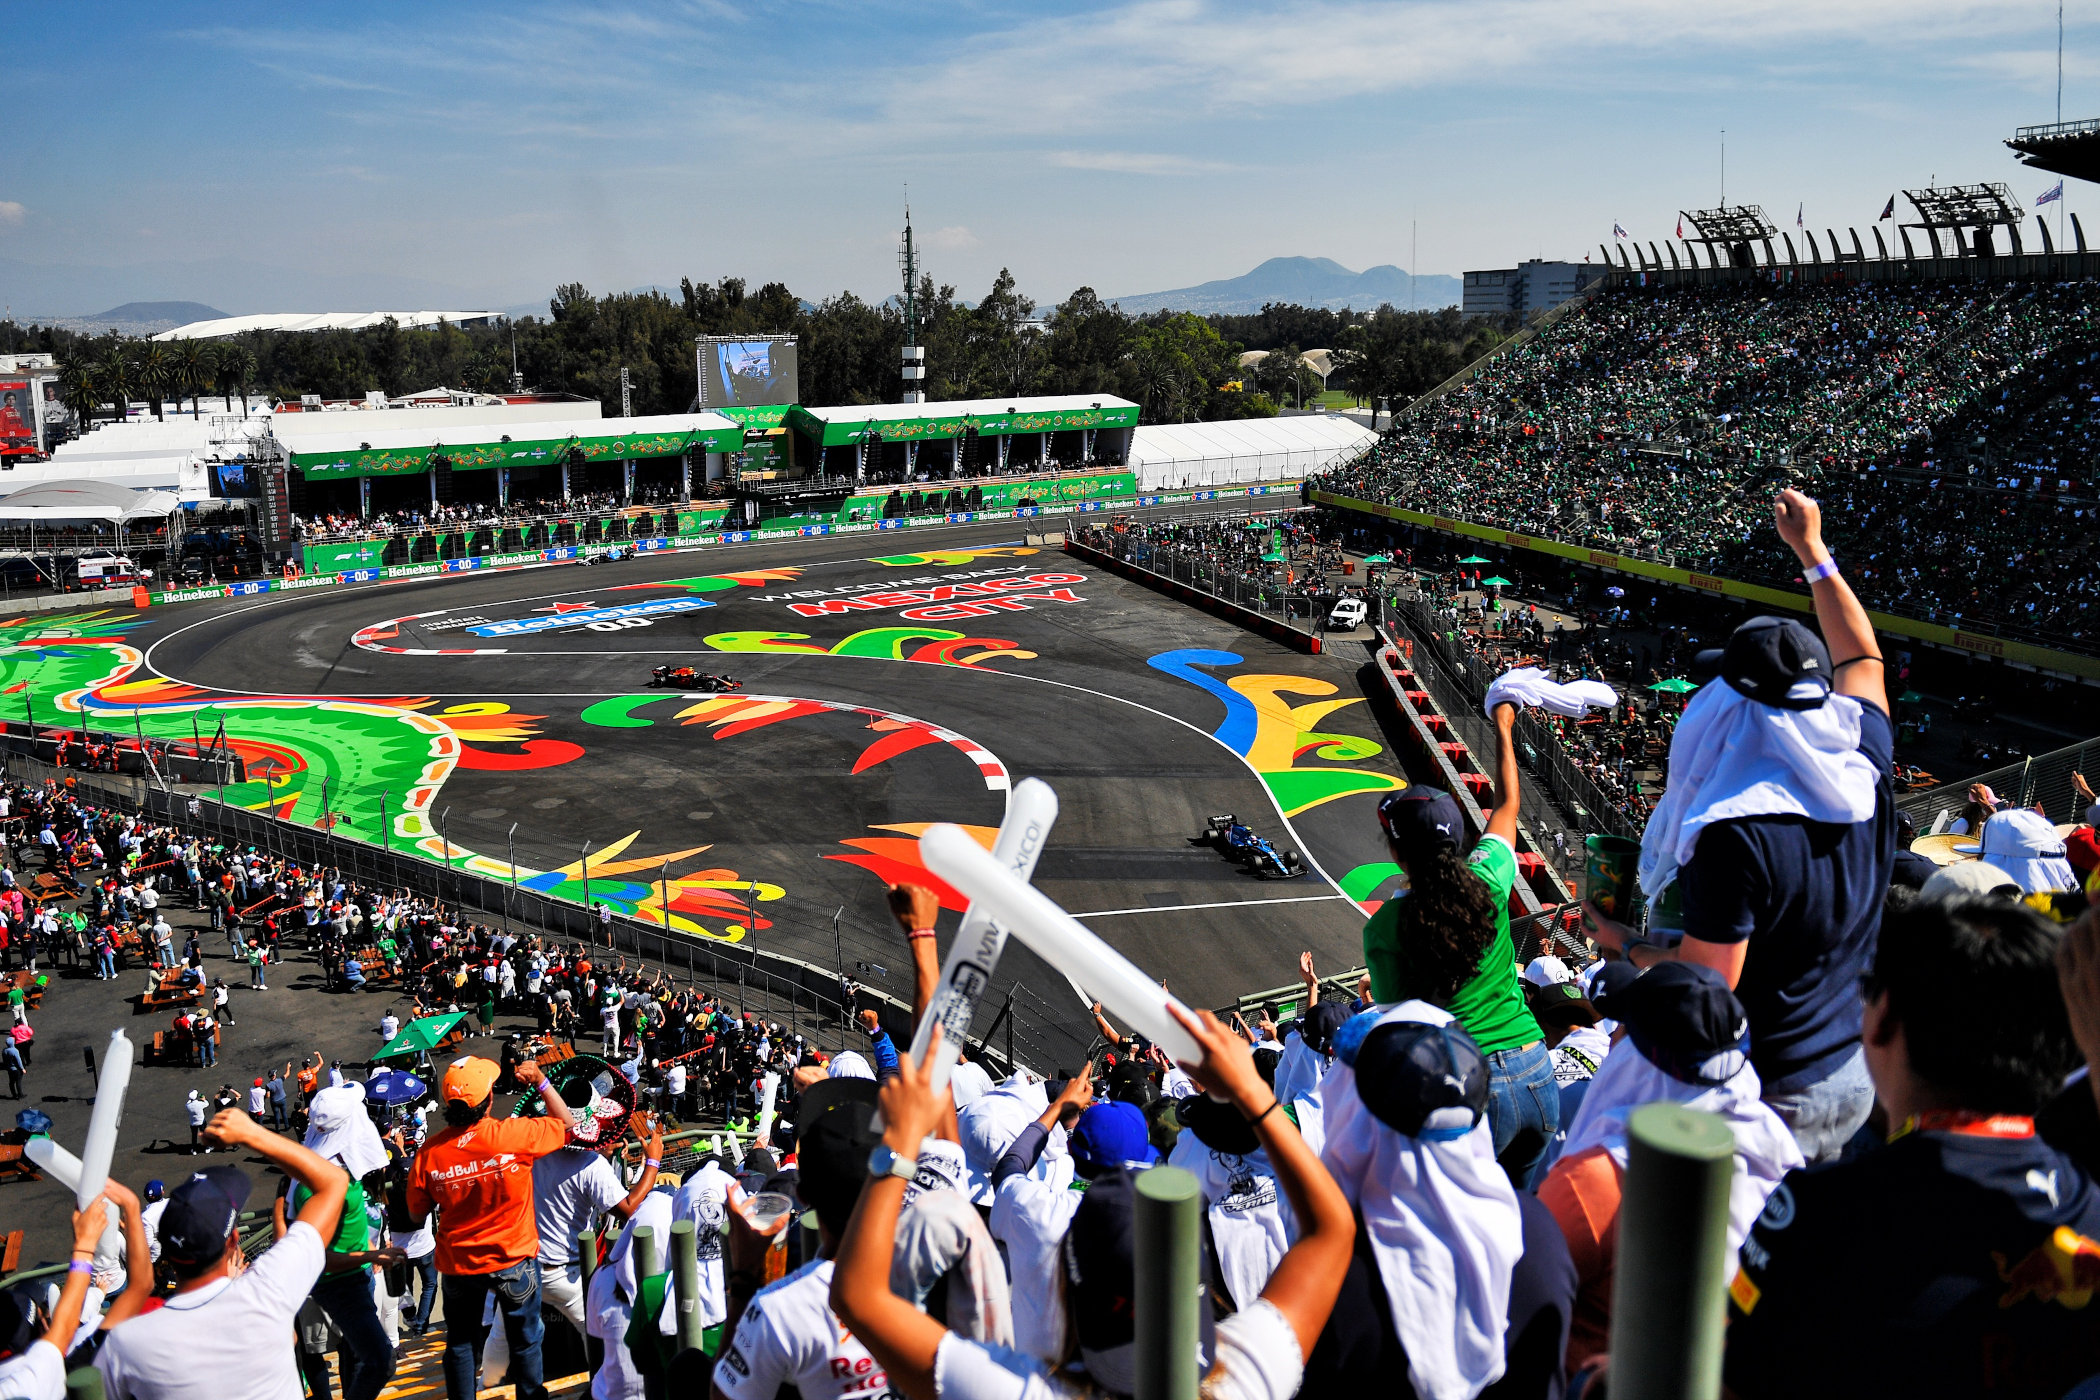 The Stadium section of the Autódromo Hermanos Rodriguez, home of the Mexican Grand Prix - F1-Fansite.com